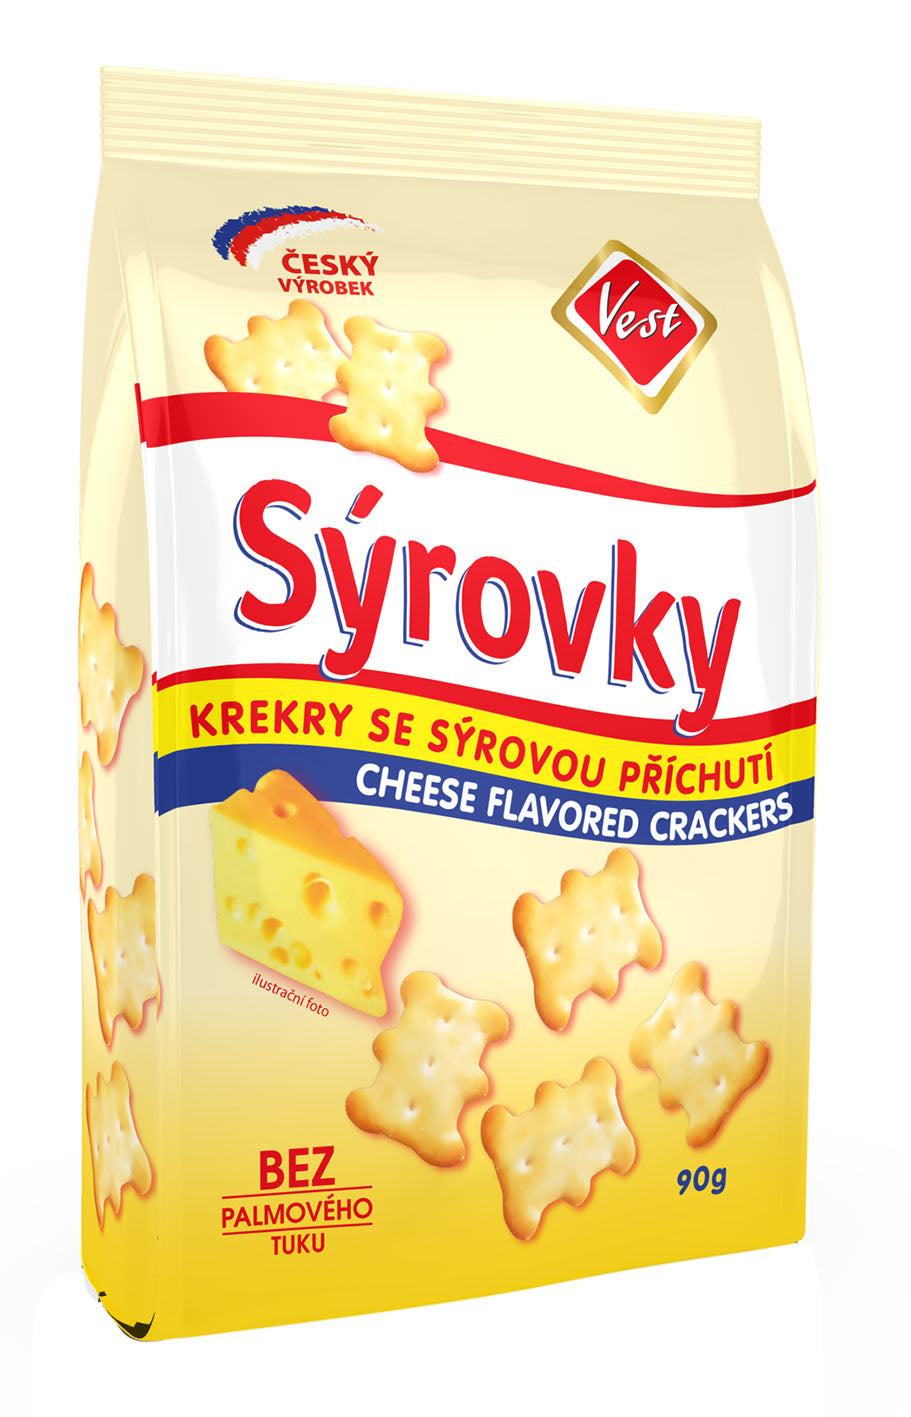 Weste Syrovky